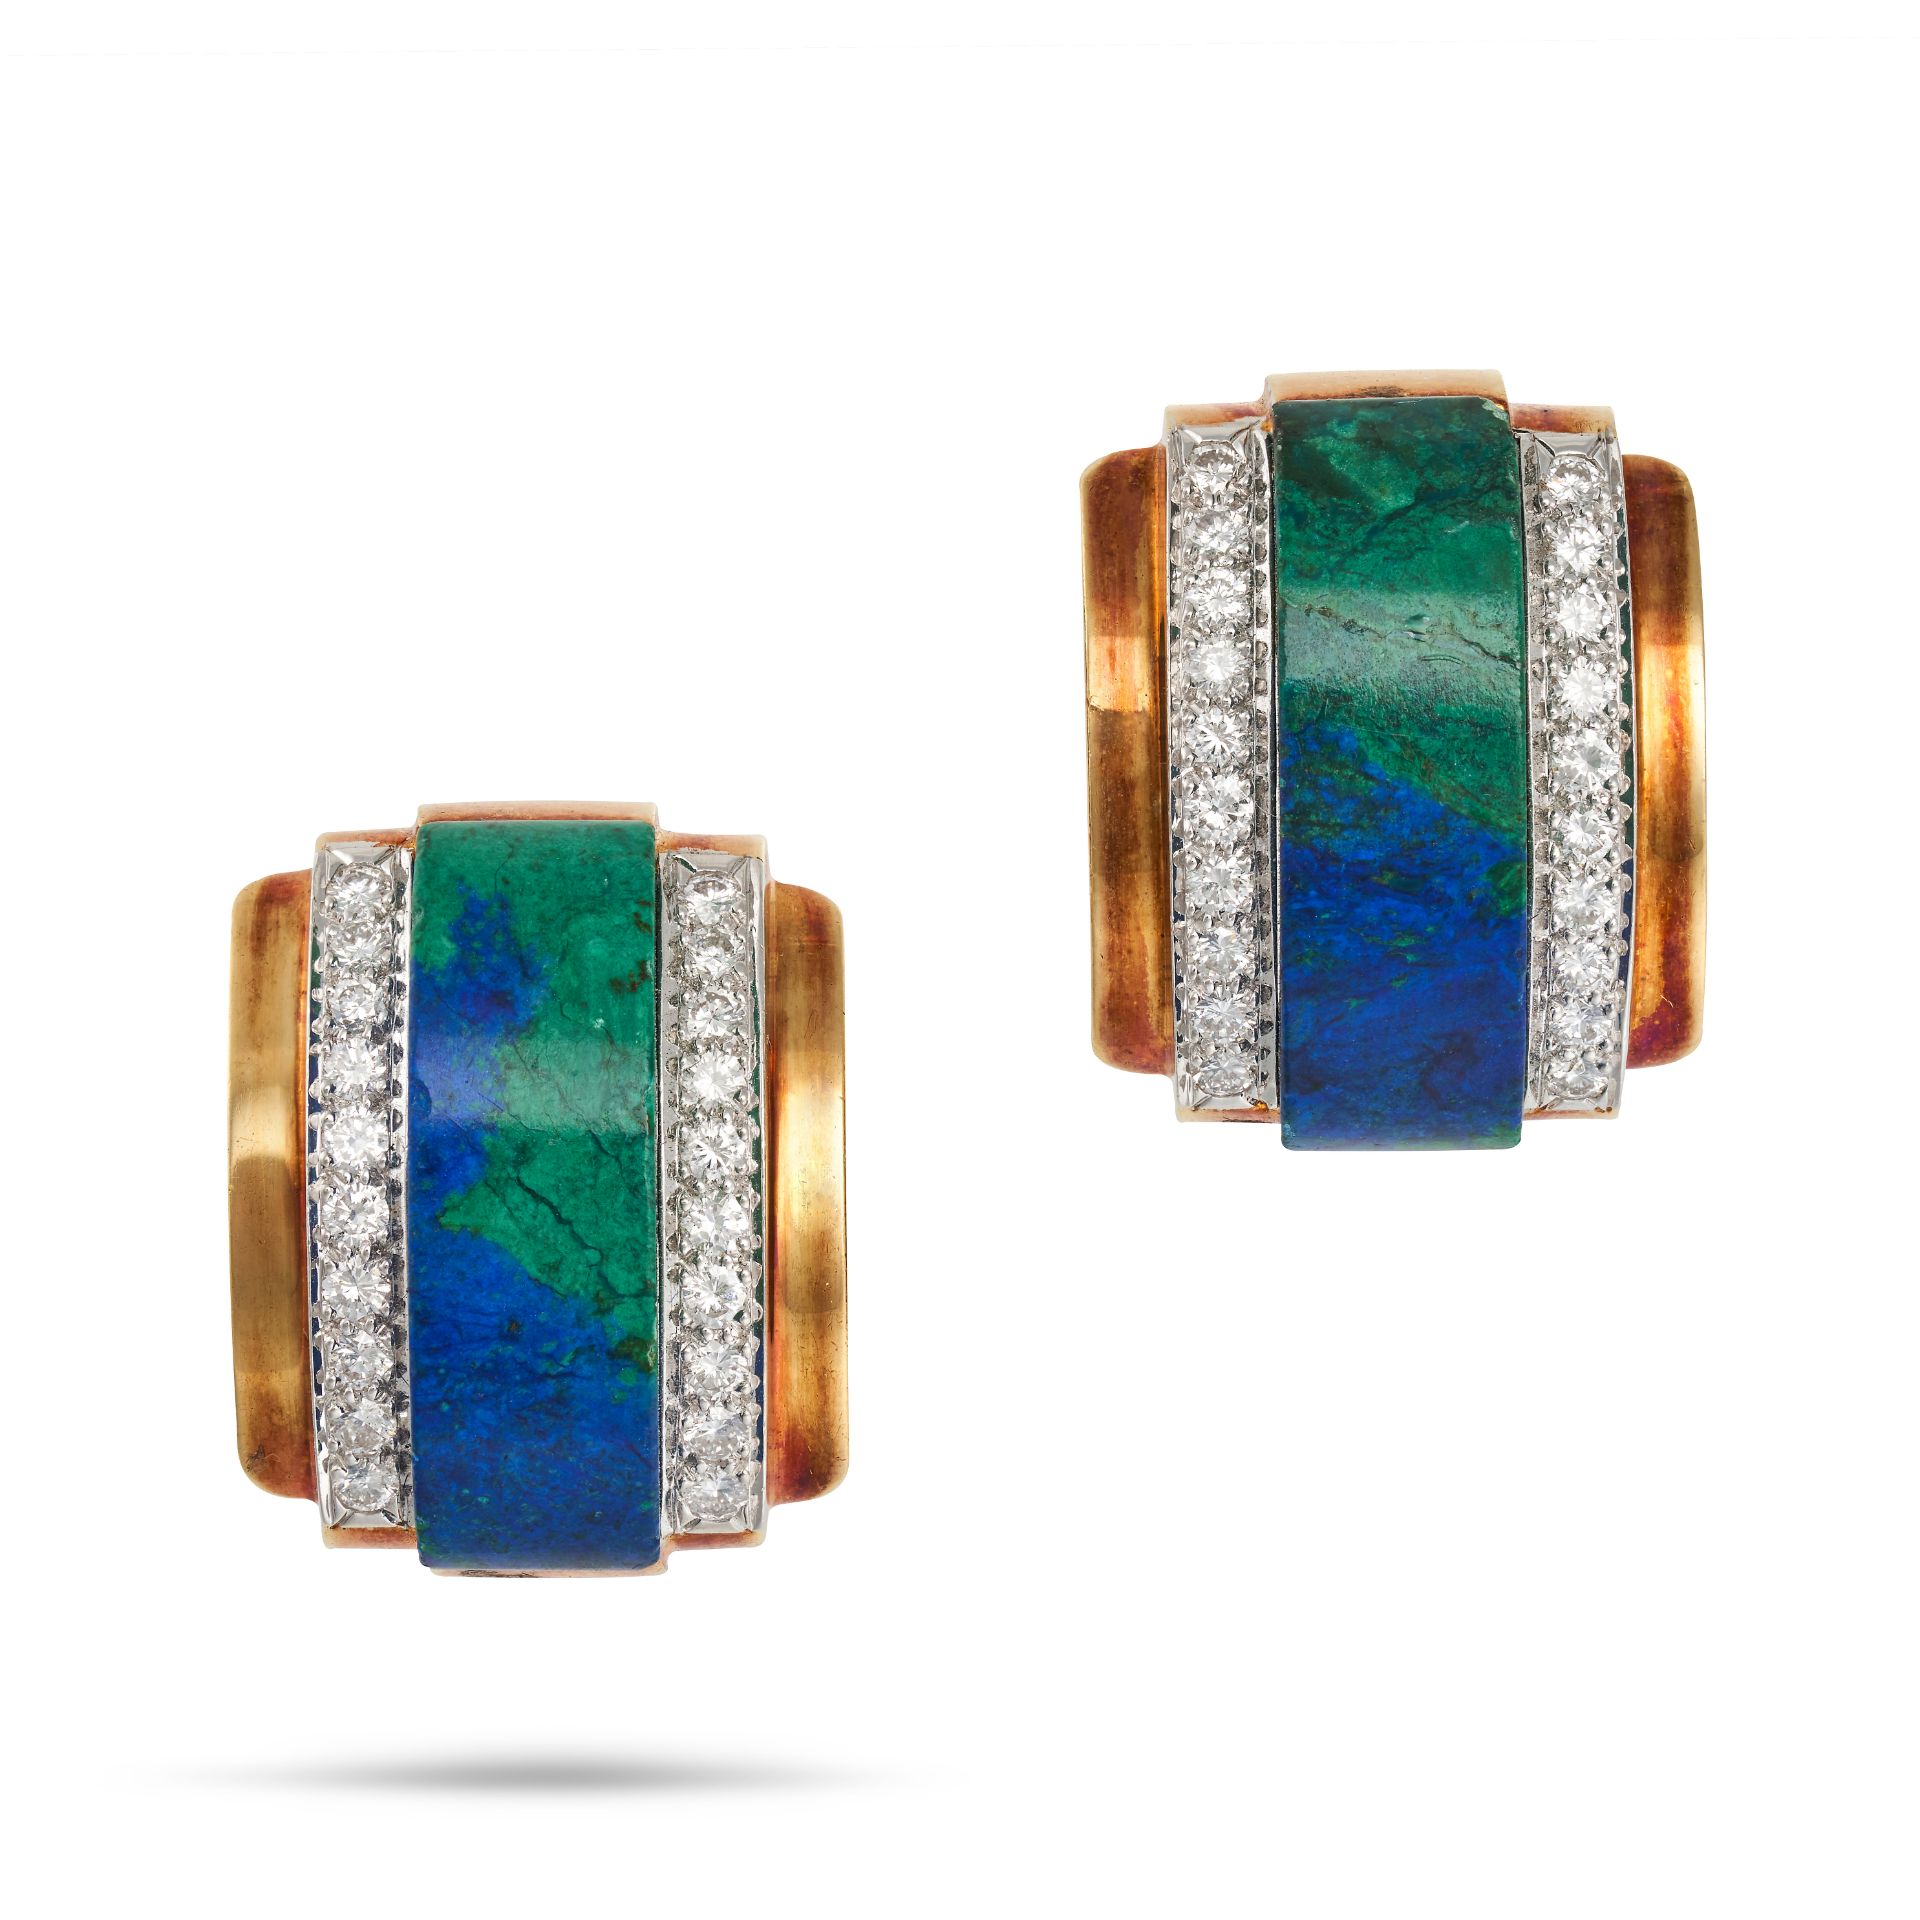 DAVID WEBB, A PAIR OF AZURITE AND DIAMOND CLIP EARRINGS in 18ct yellow gold and platinum, each se...